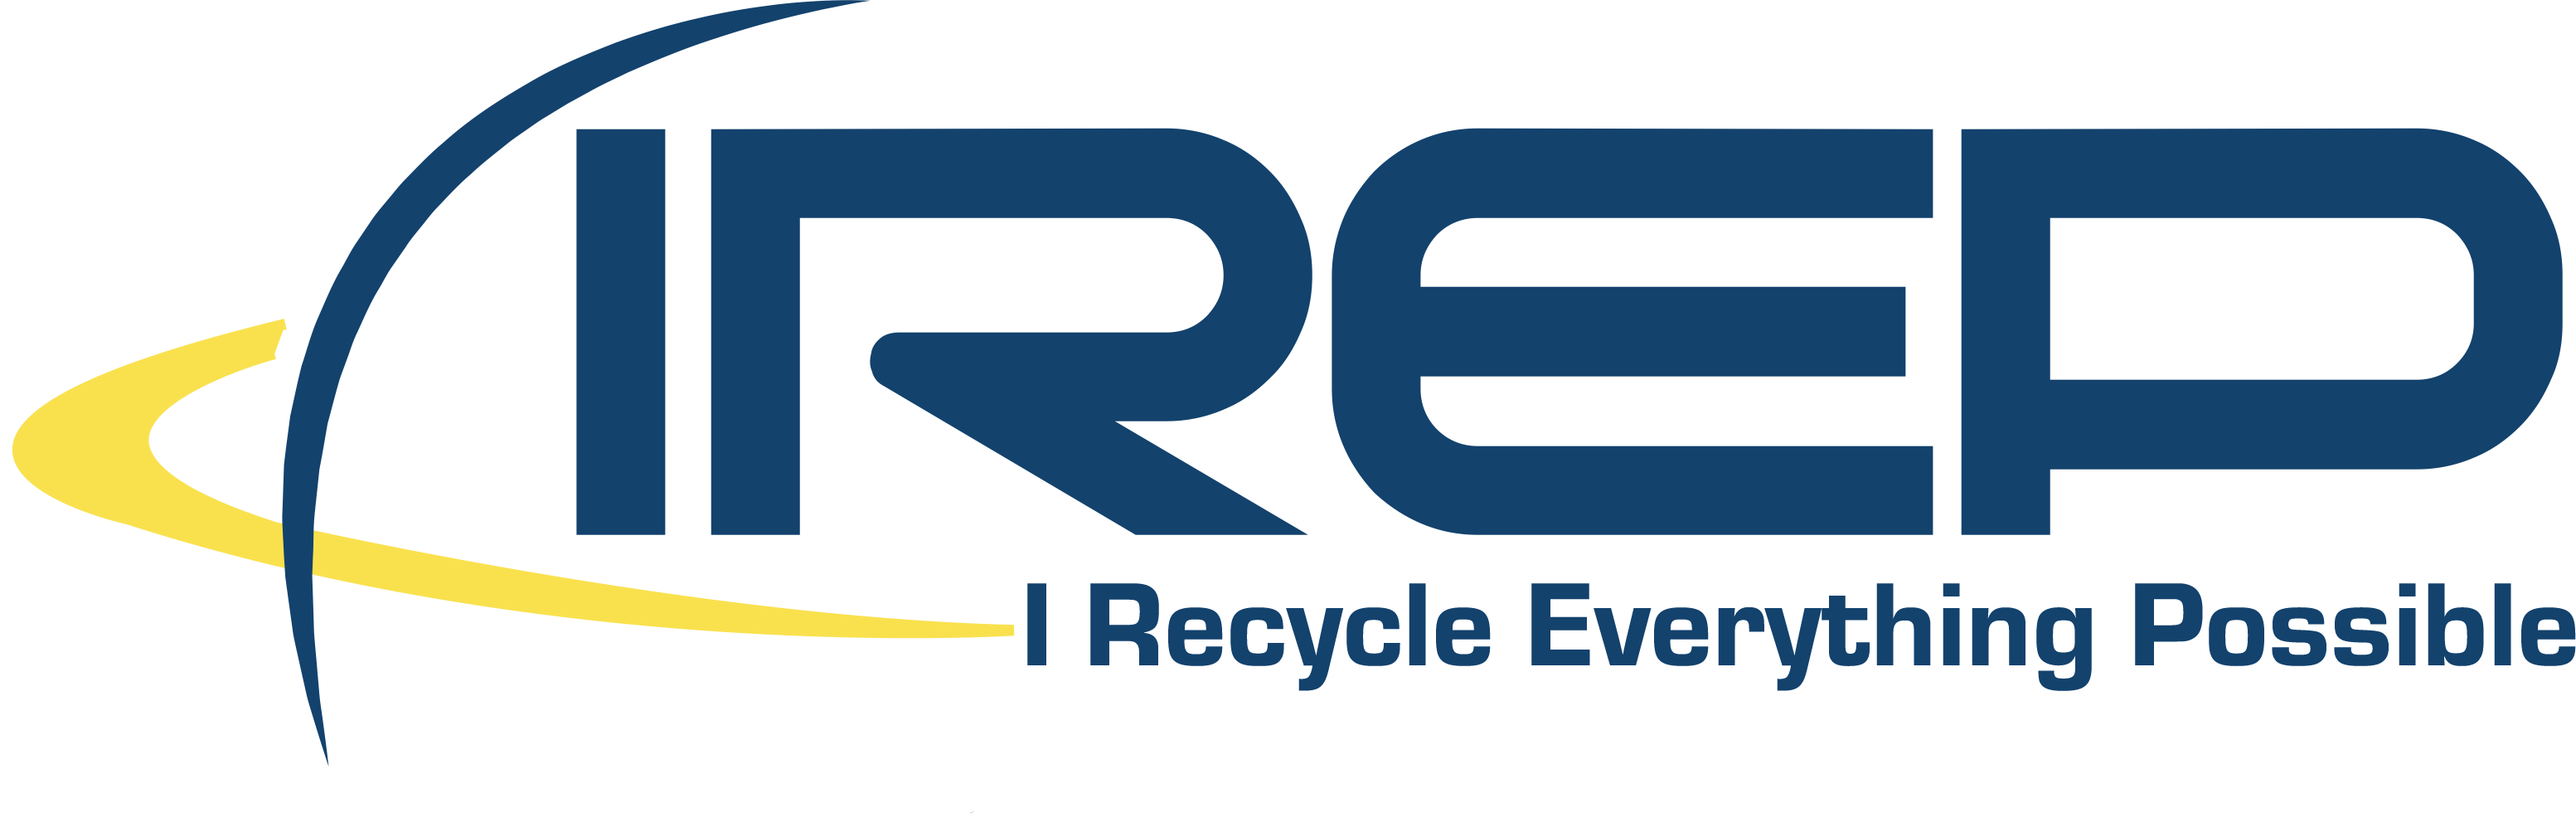 IREP I Recycle Everything Possible logo